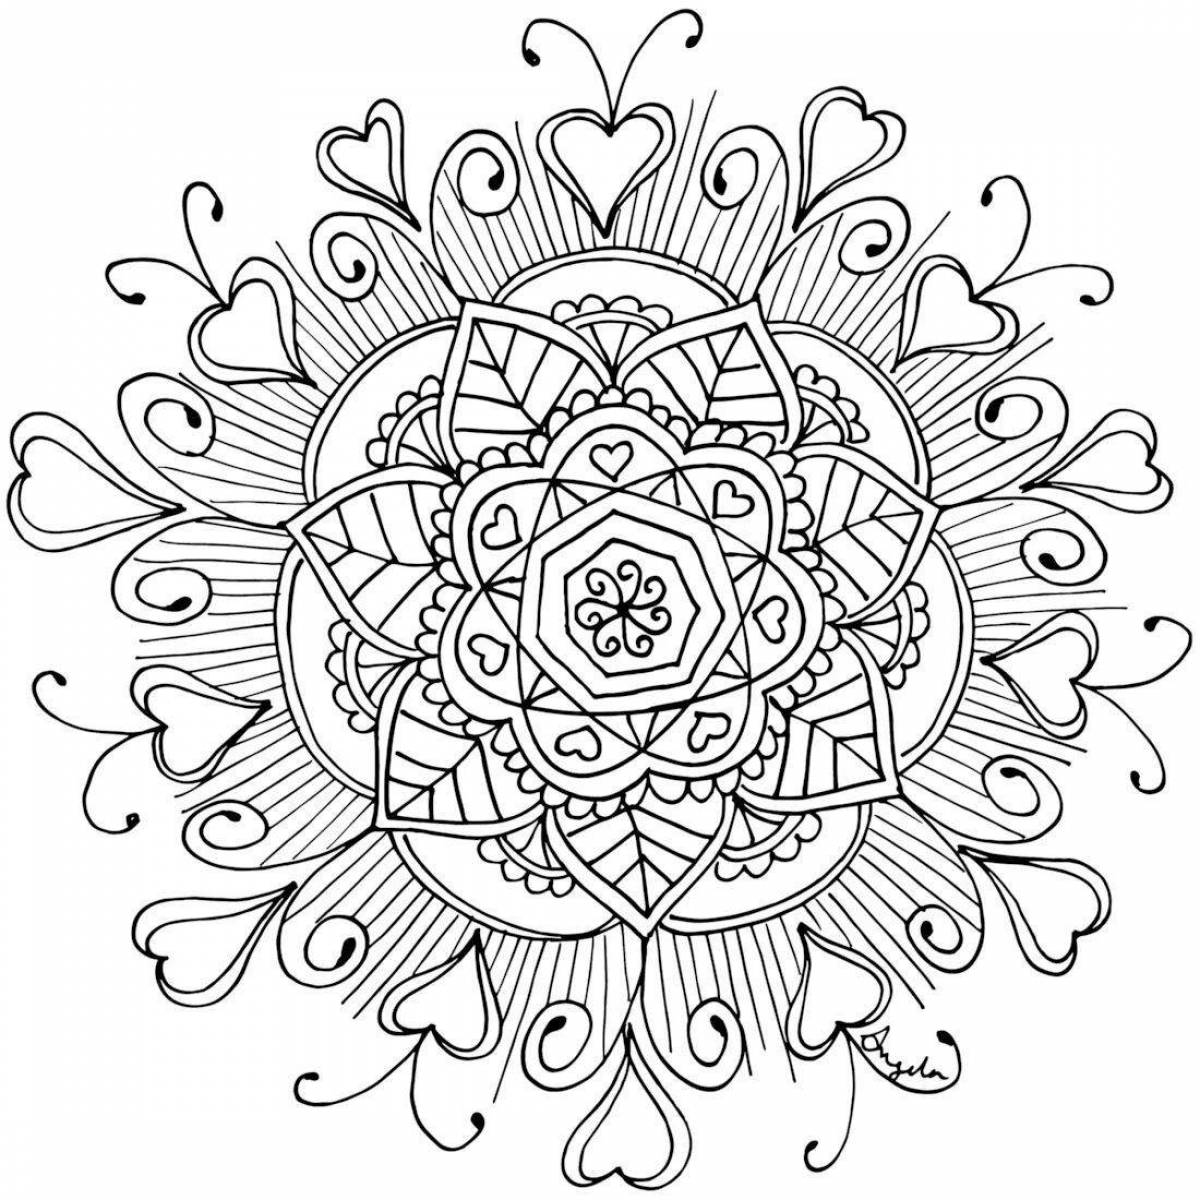 Blissful mandala coloring book for relationships